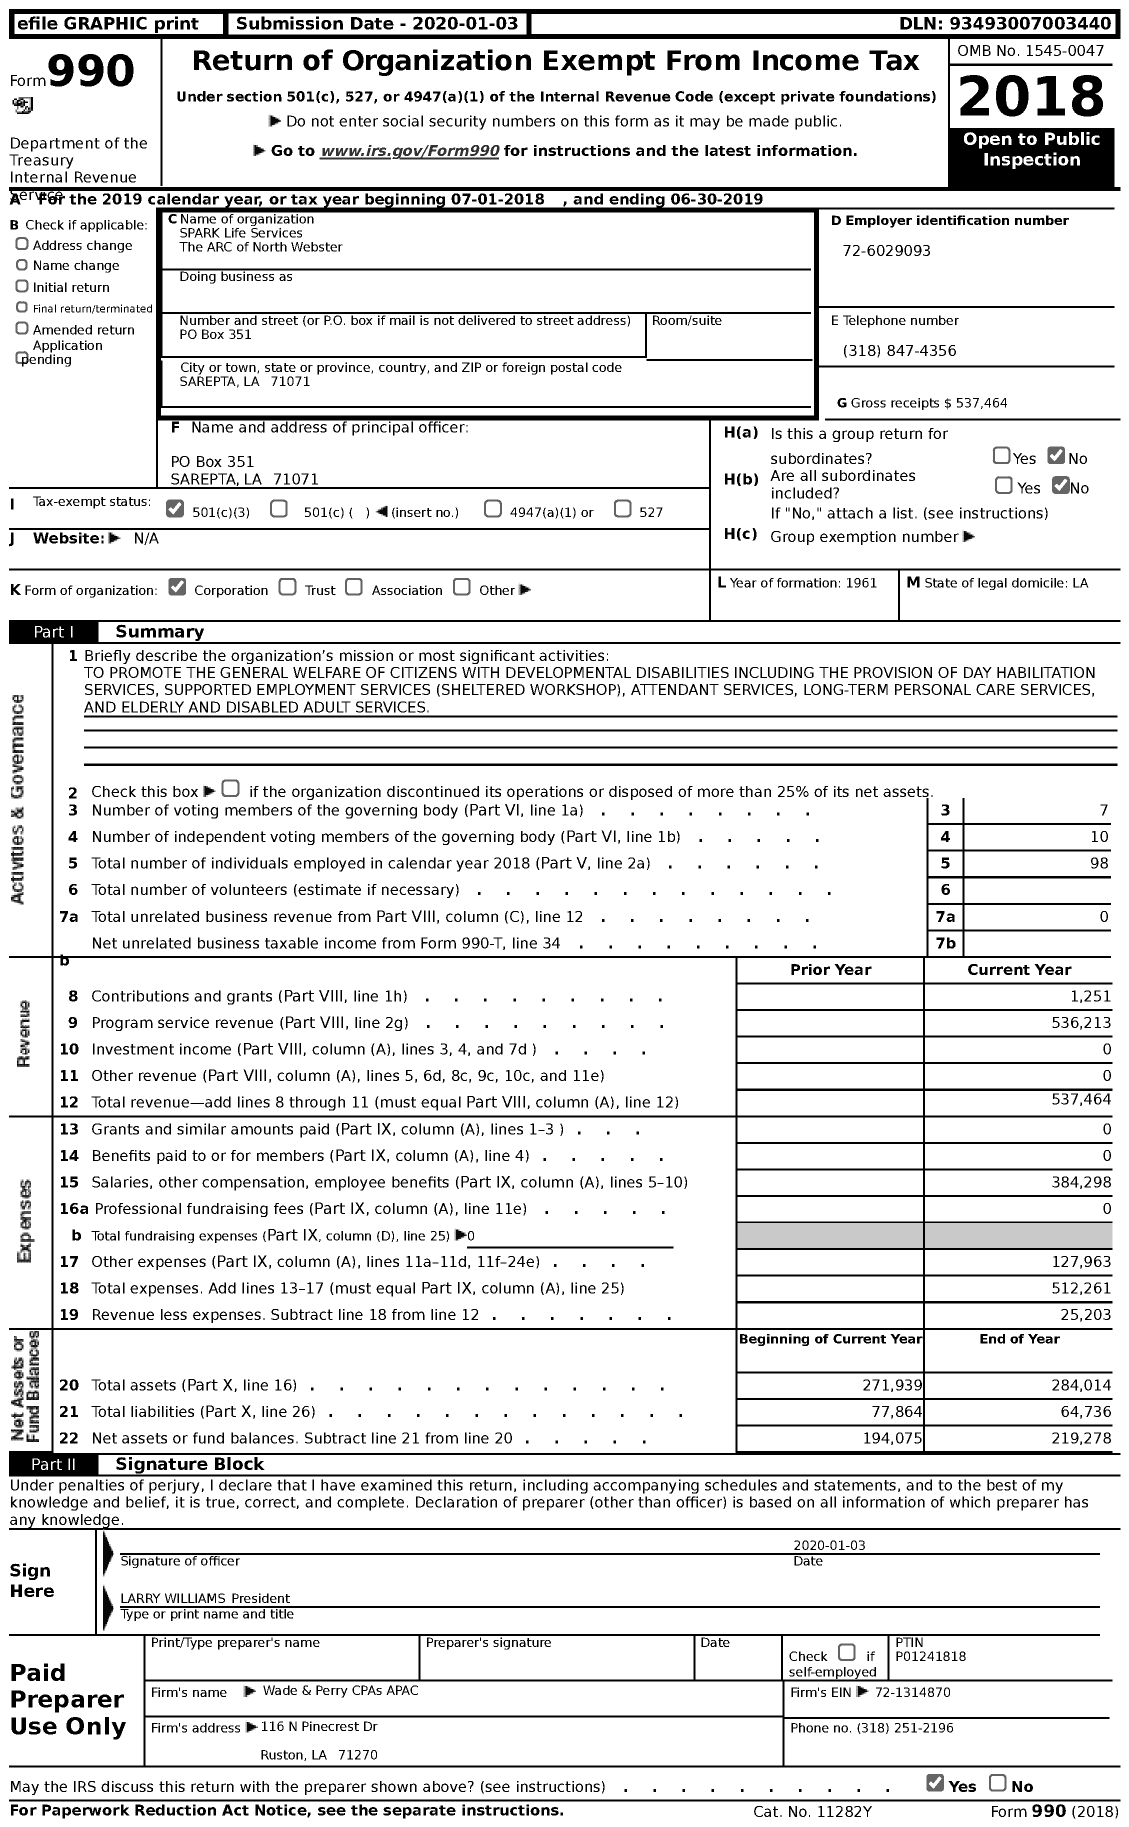 Image of first page of 2018 Form 990 for SPARK Life Services The ARC of North Webster